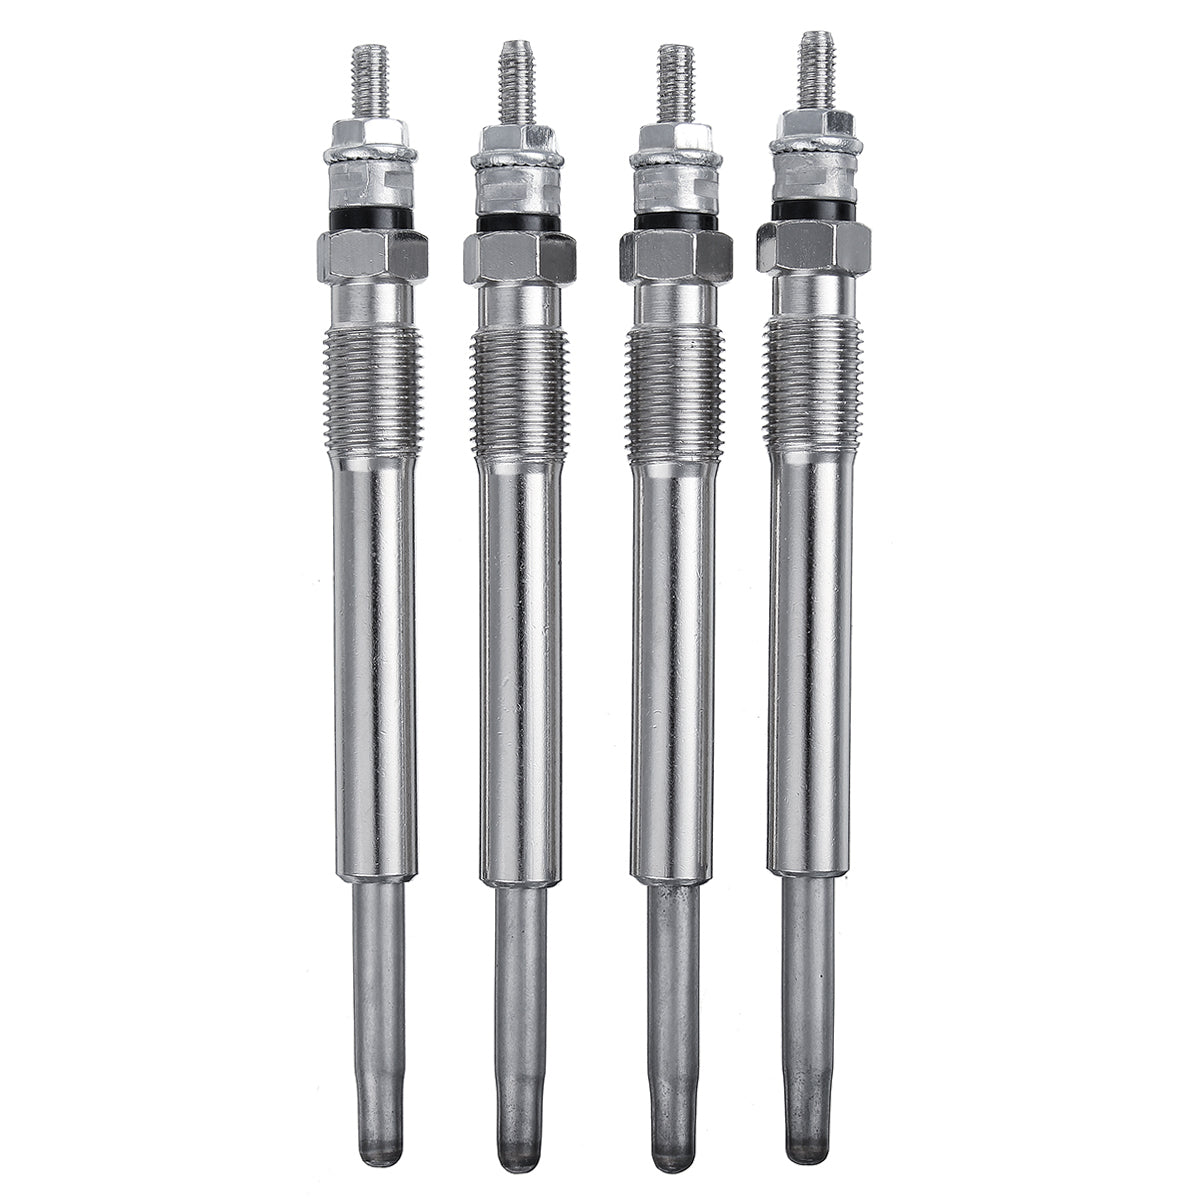 Slate Gray 4Pcs Diesel Heater Glow Plugs GP504X4 For Citroen For Fiat For Peugeot 206 For Suzuki For Lancia 2.0 HDI